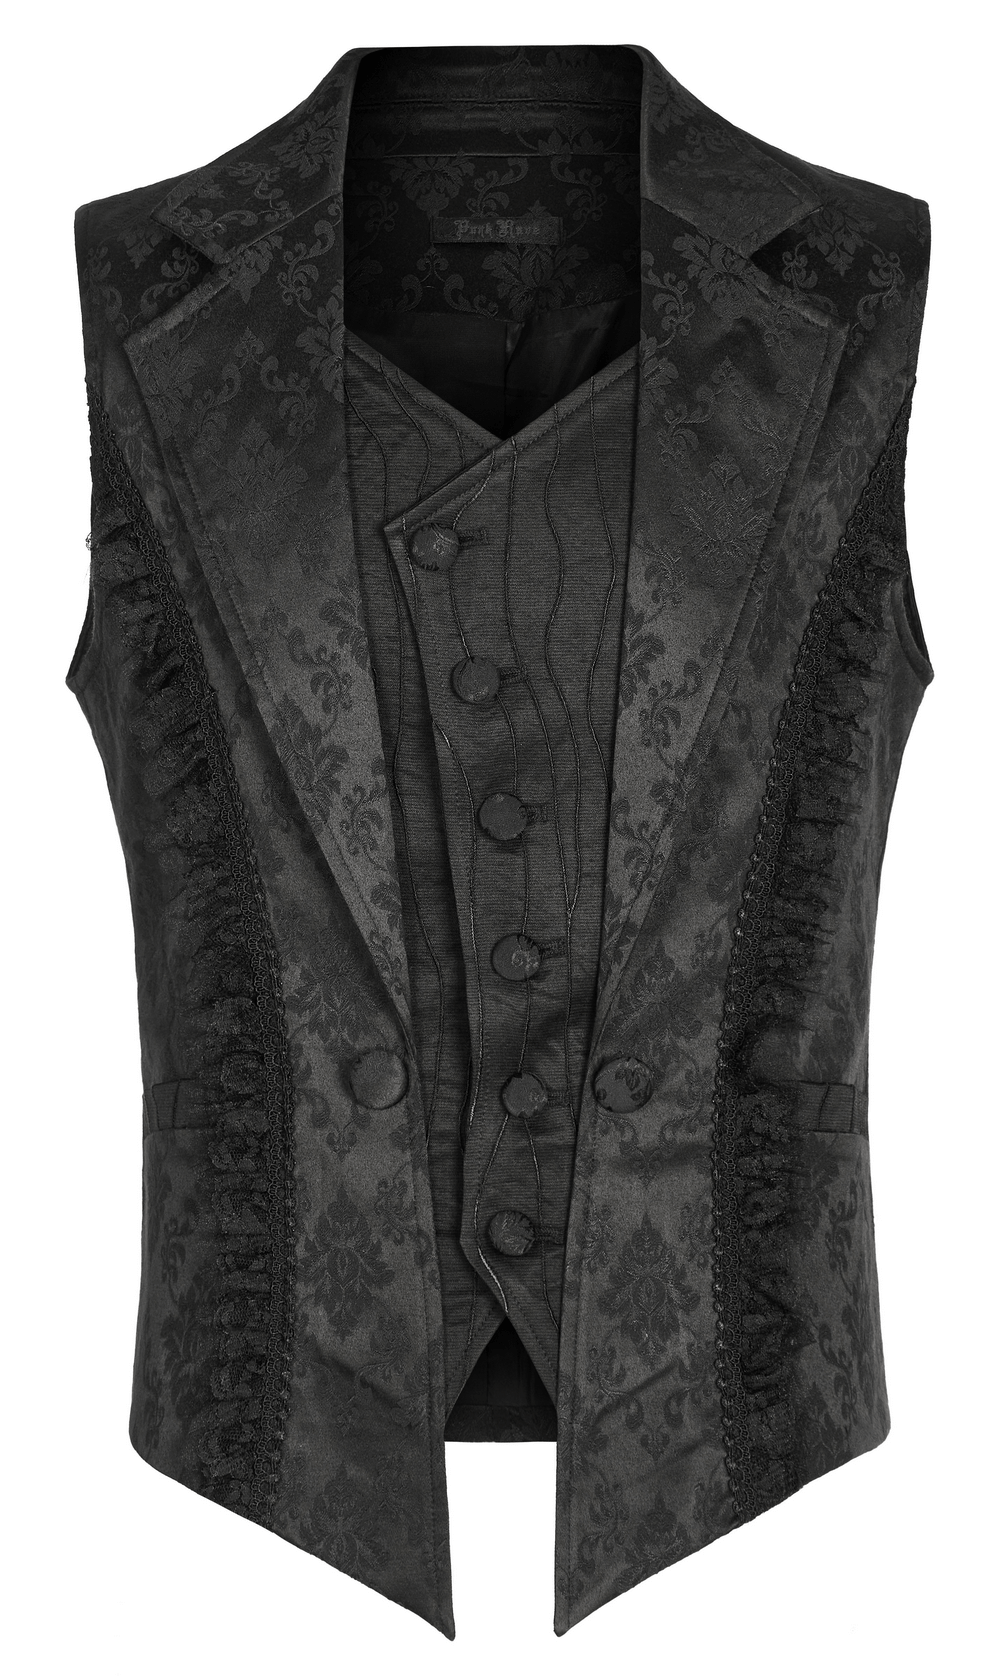 Victorian Gothic Jacquard Lace-Up Vest Waistcoat - HARD'N'HEAVY